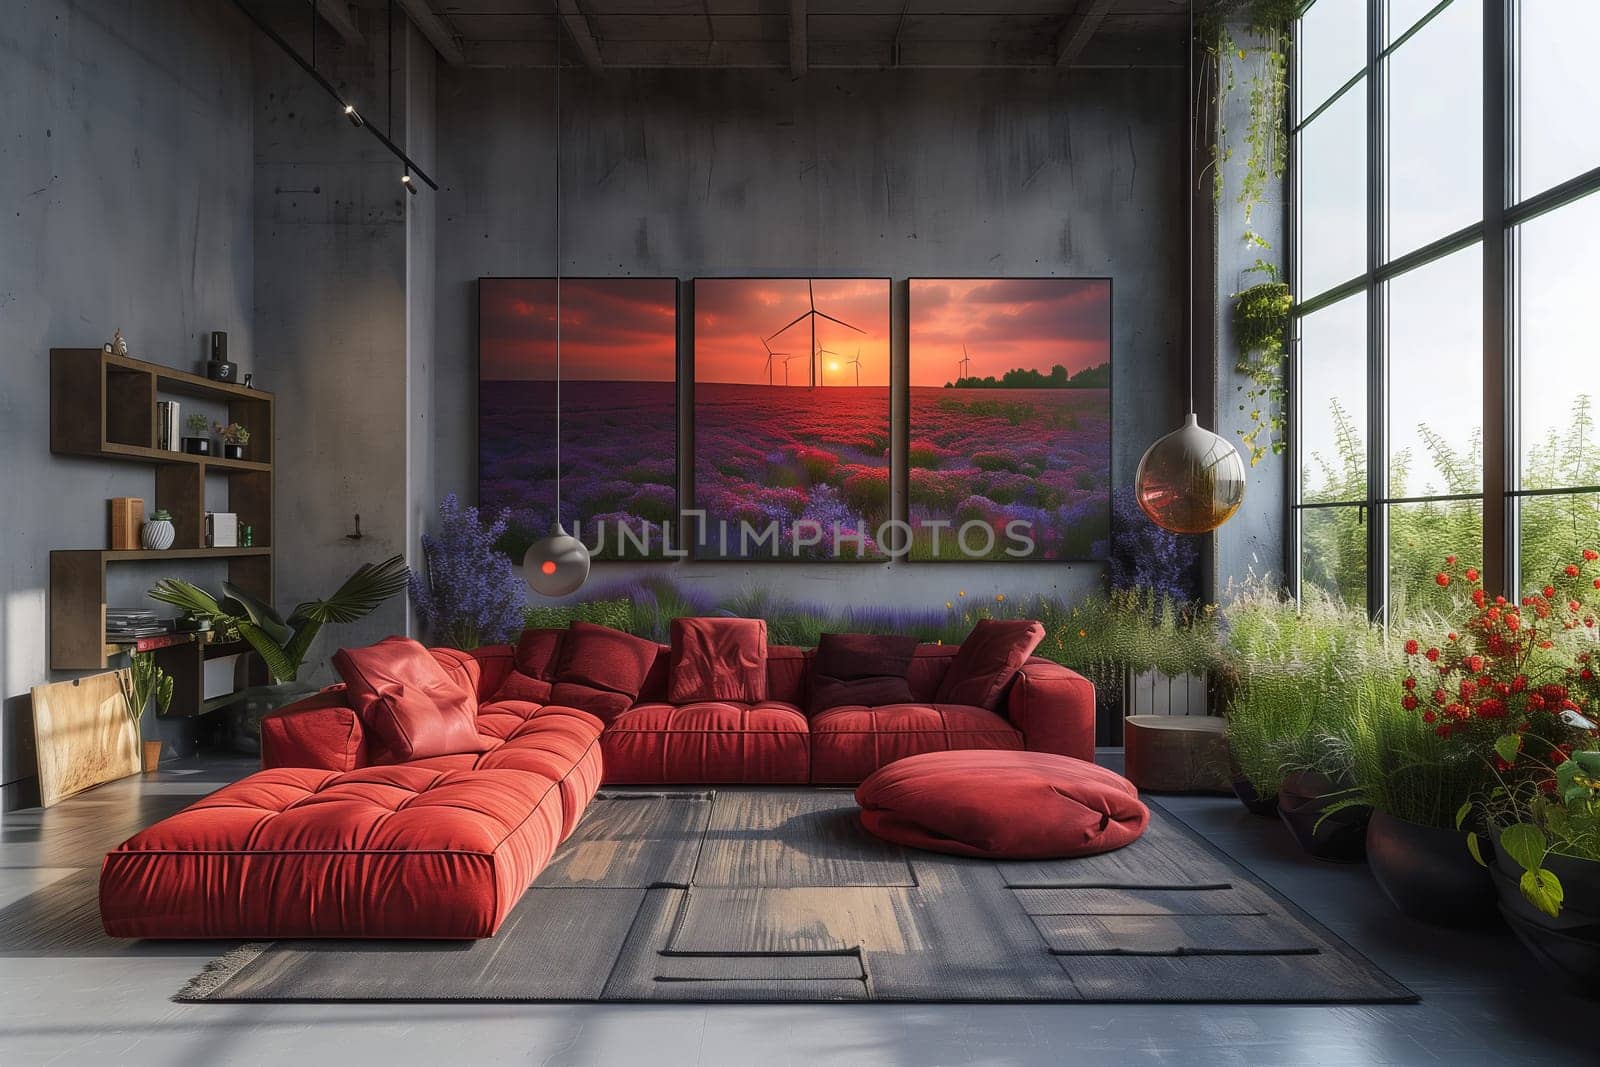 An inviting living room with a red sectional couch, a painting on the wall, and wooden flooring, showcasing a cozy and stylish interior design